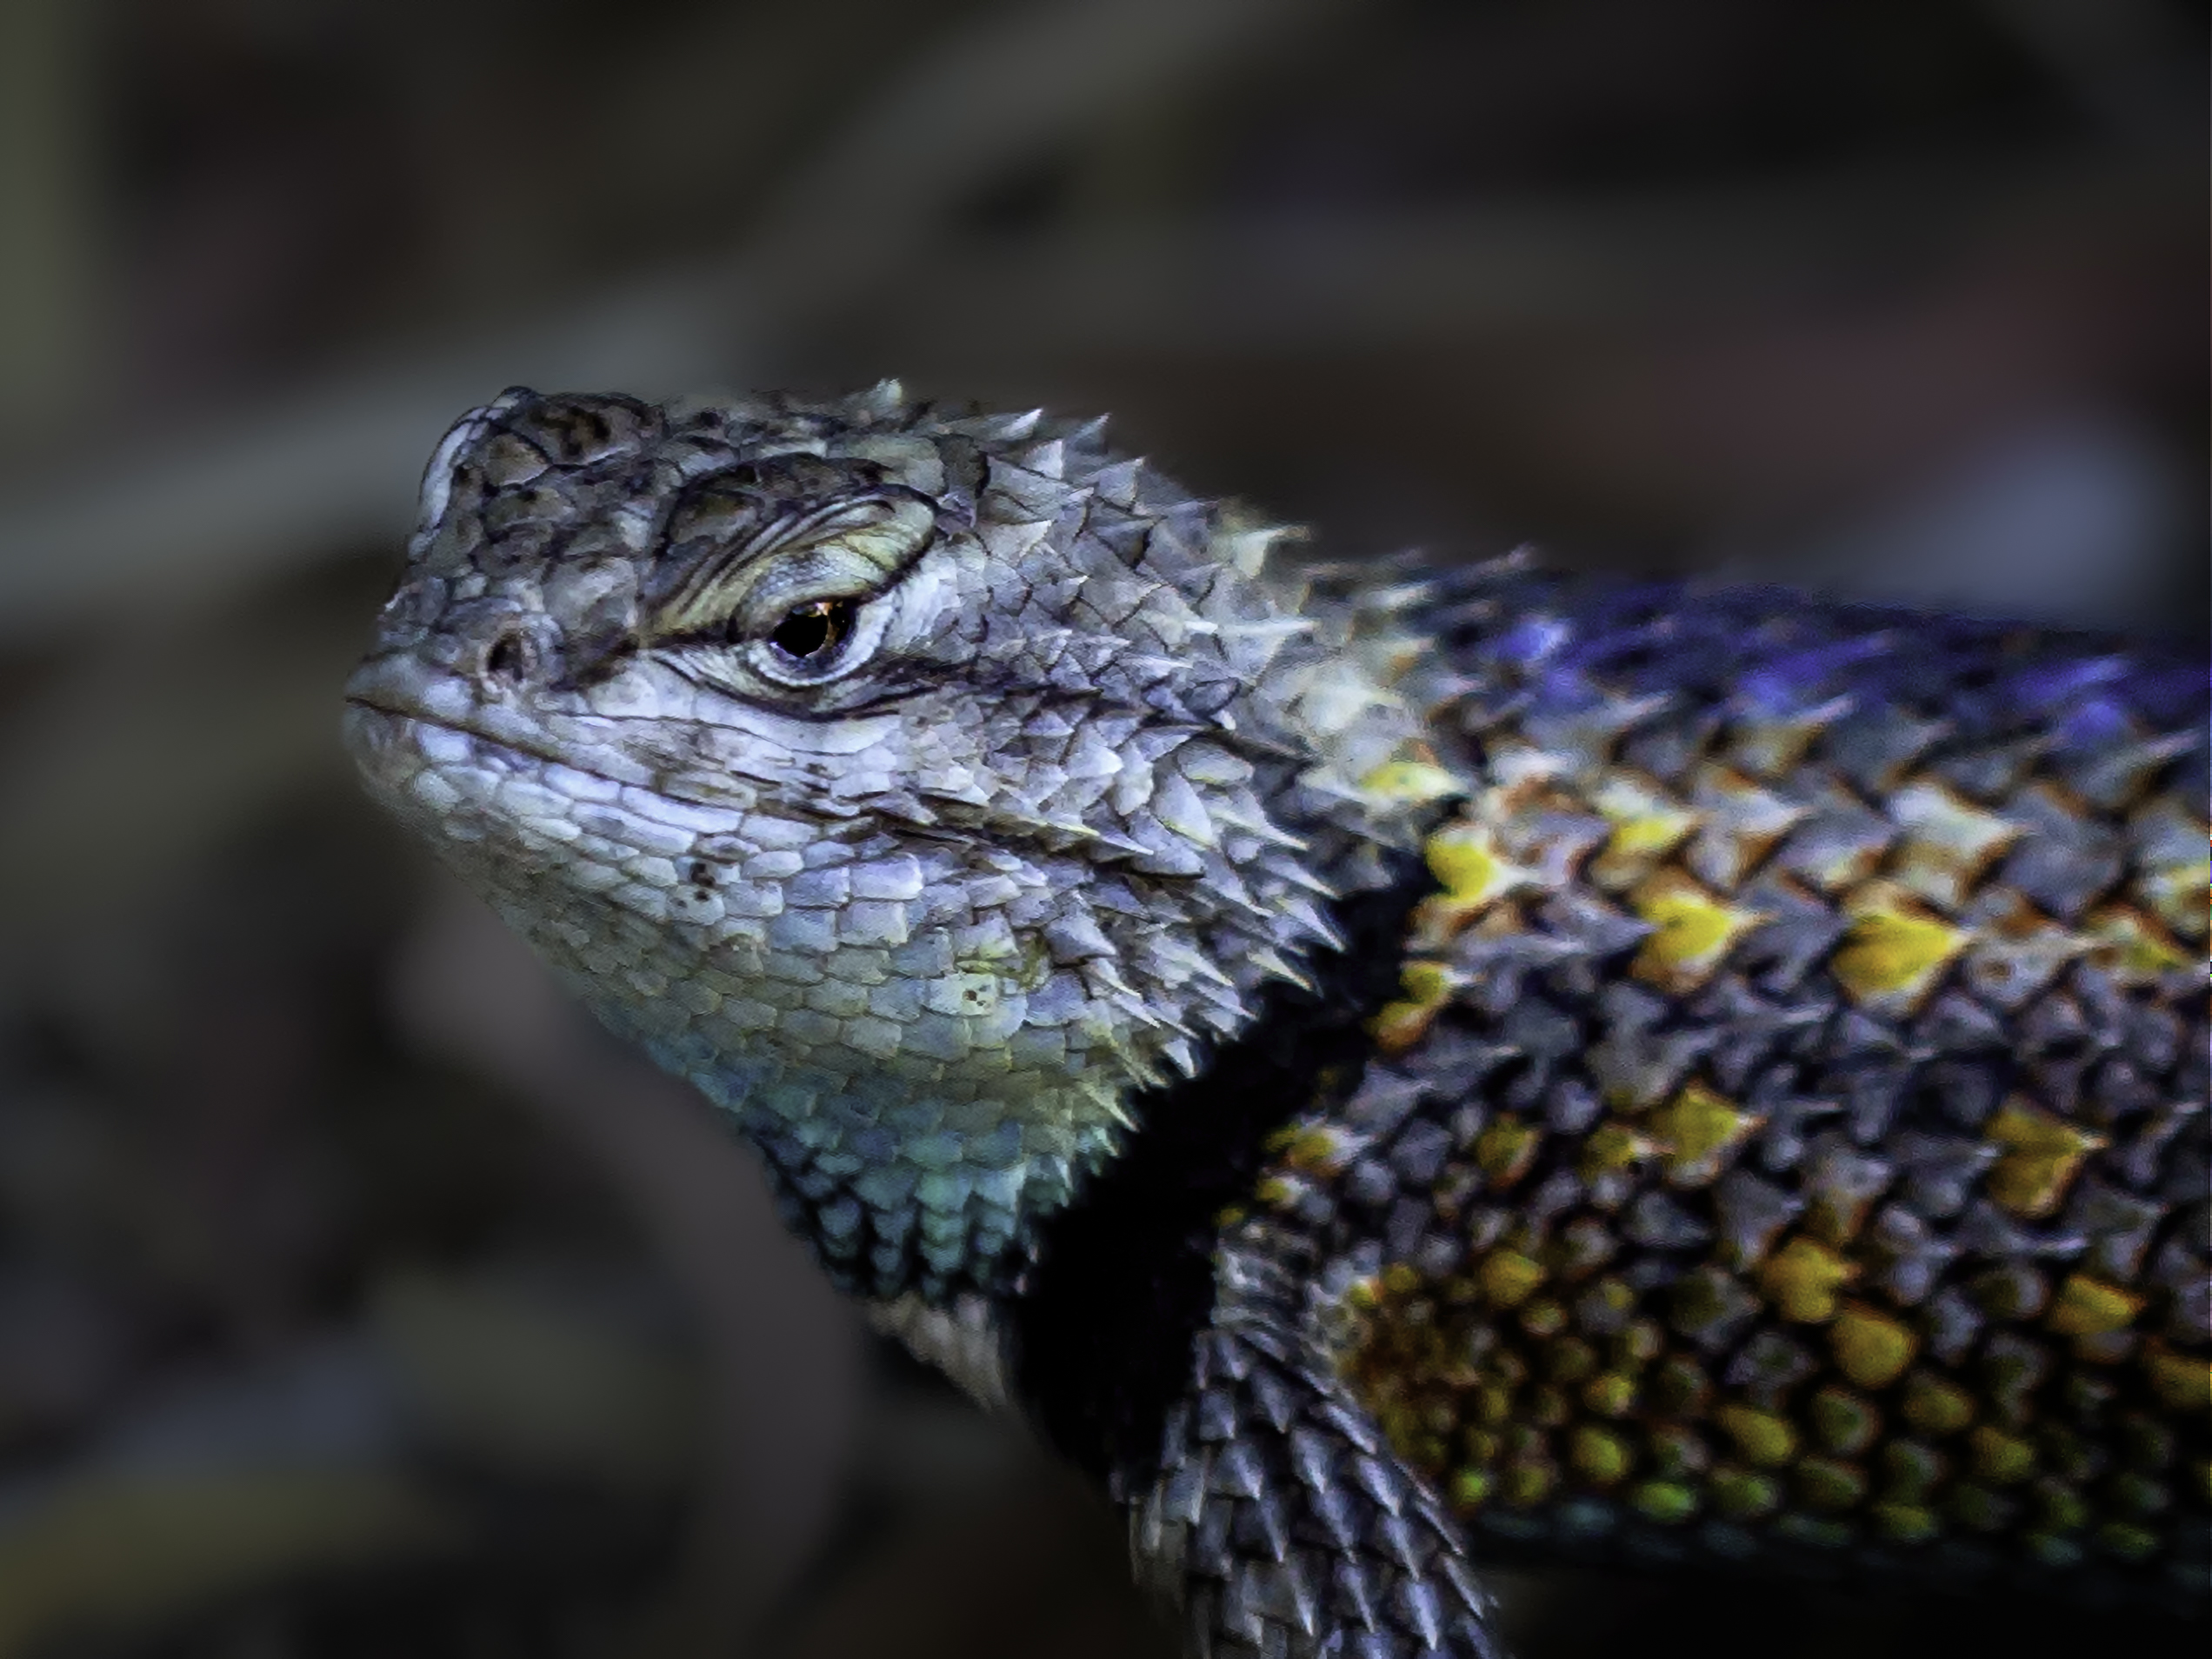 Photo by Jim Rust  |  I spotted this wild lizard as I was walking down a path at the Phoenix Zoo.